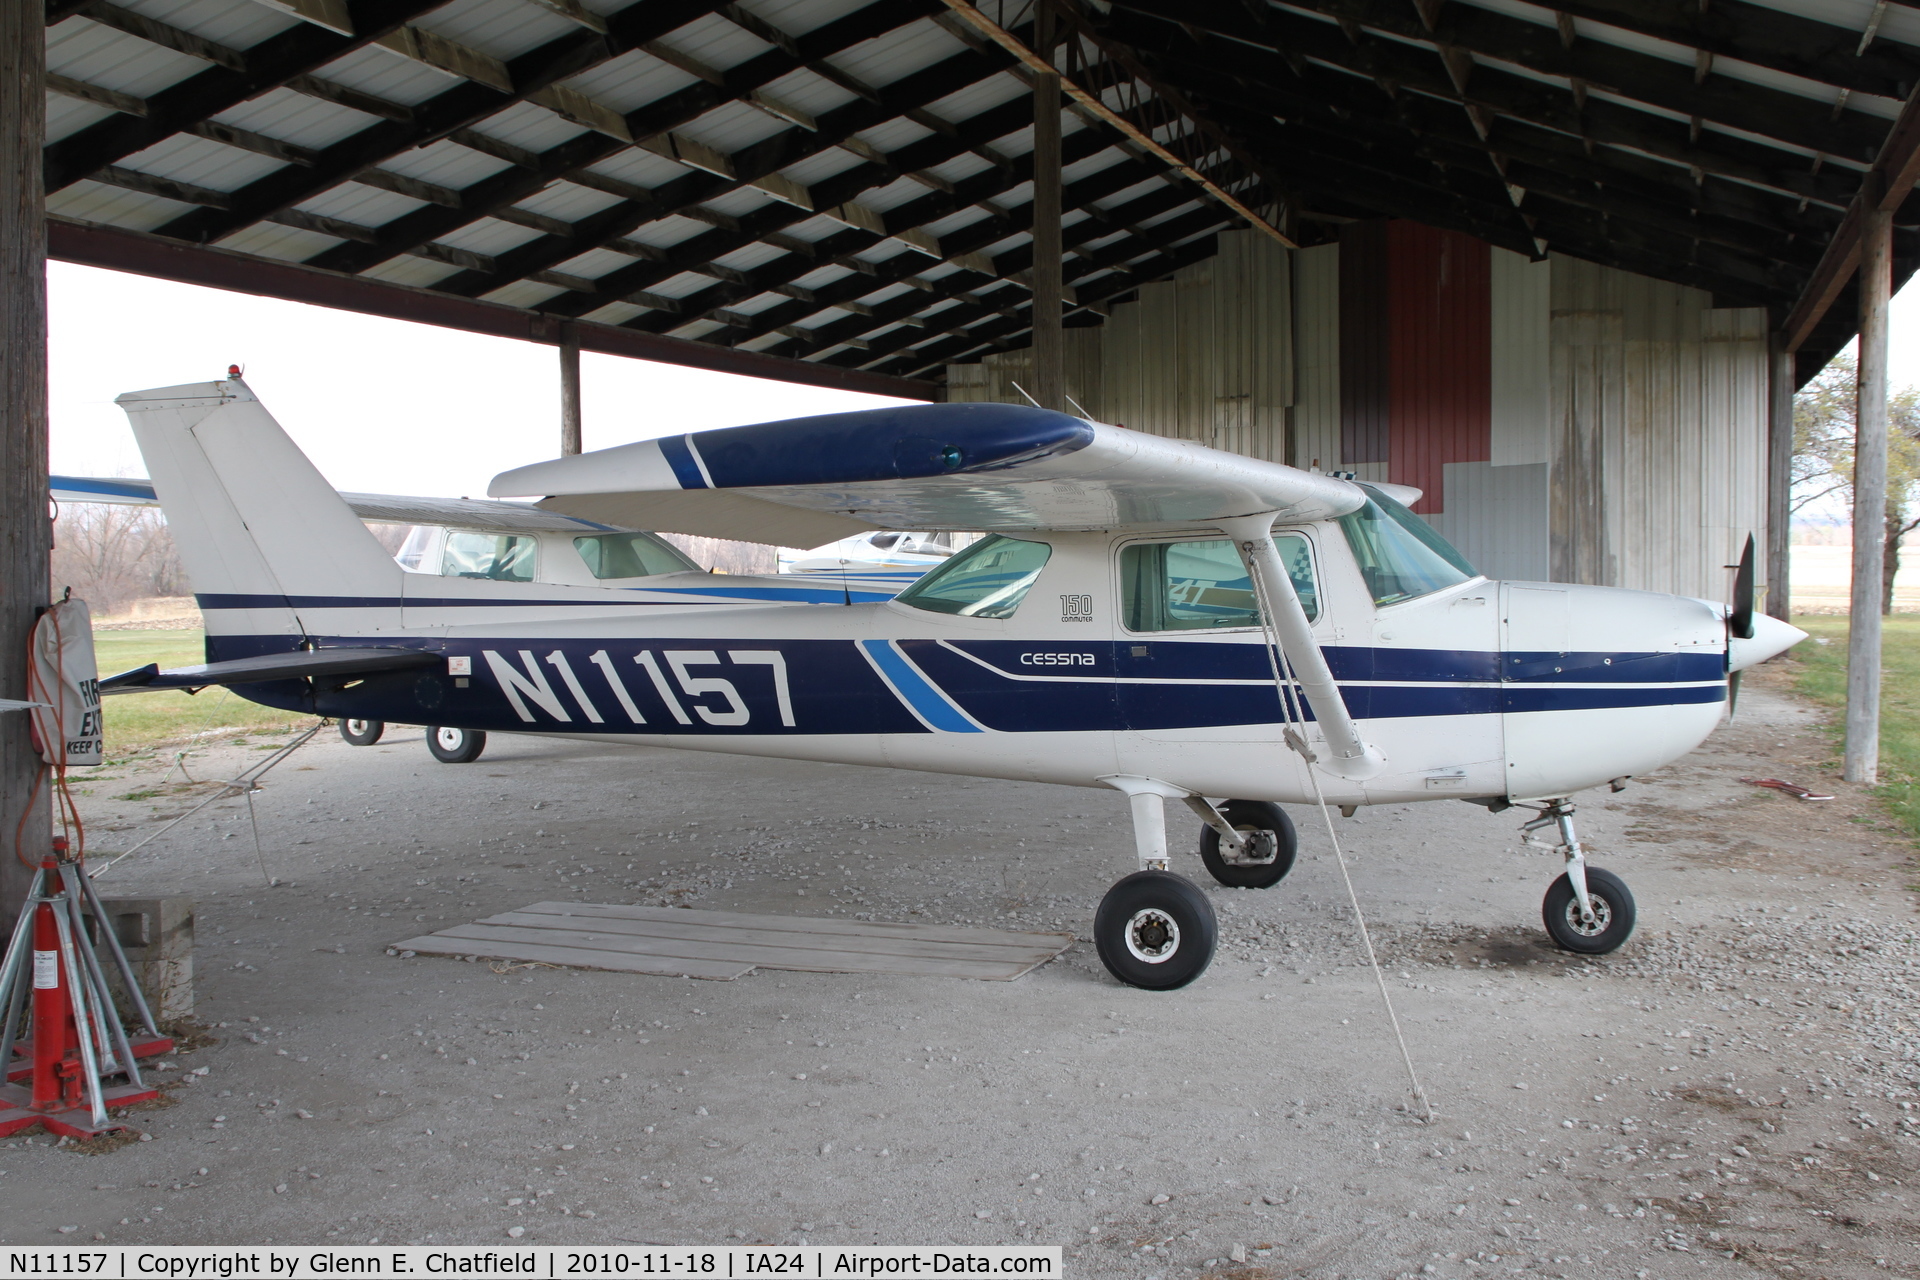 N11157, 1973 Cessna 150L C/N 15075231, Parked in the open hangar